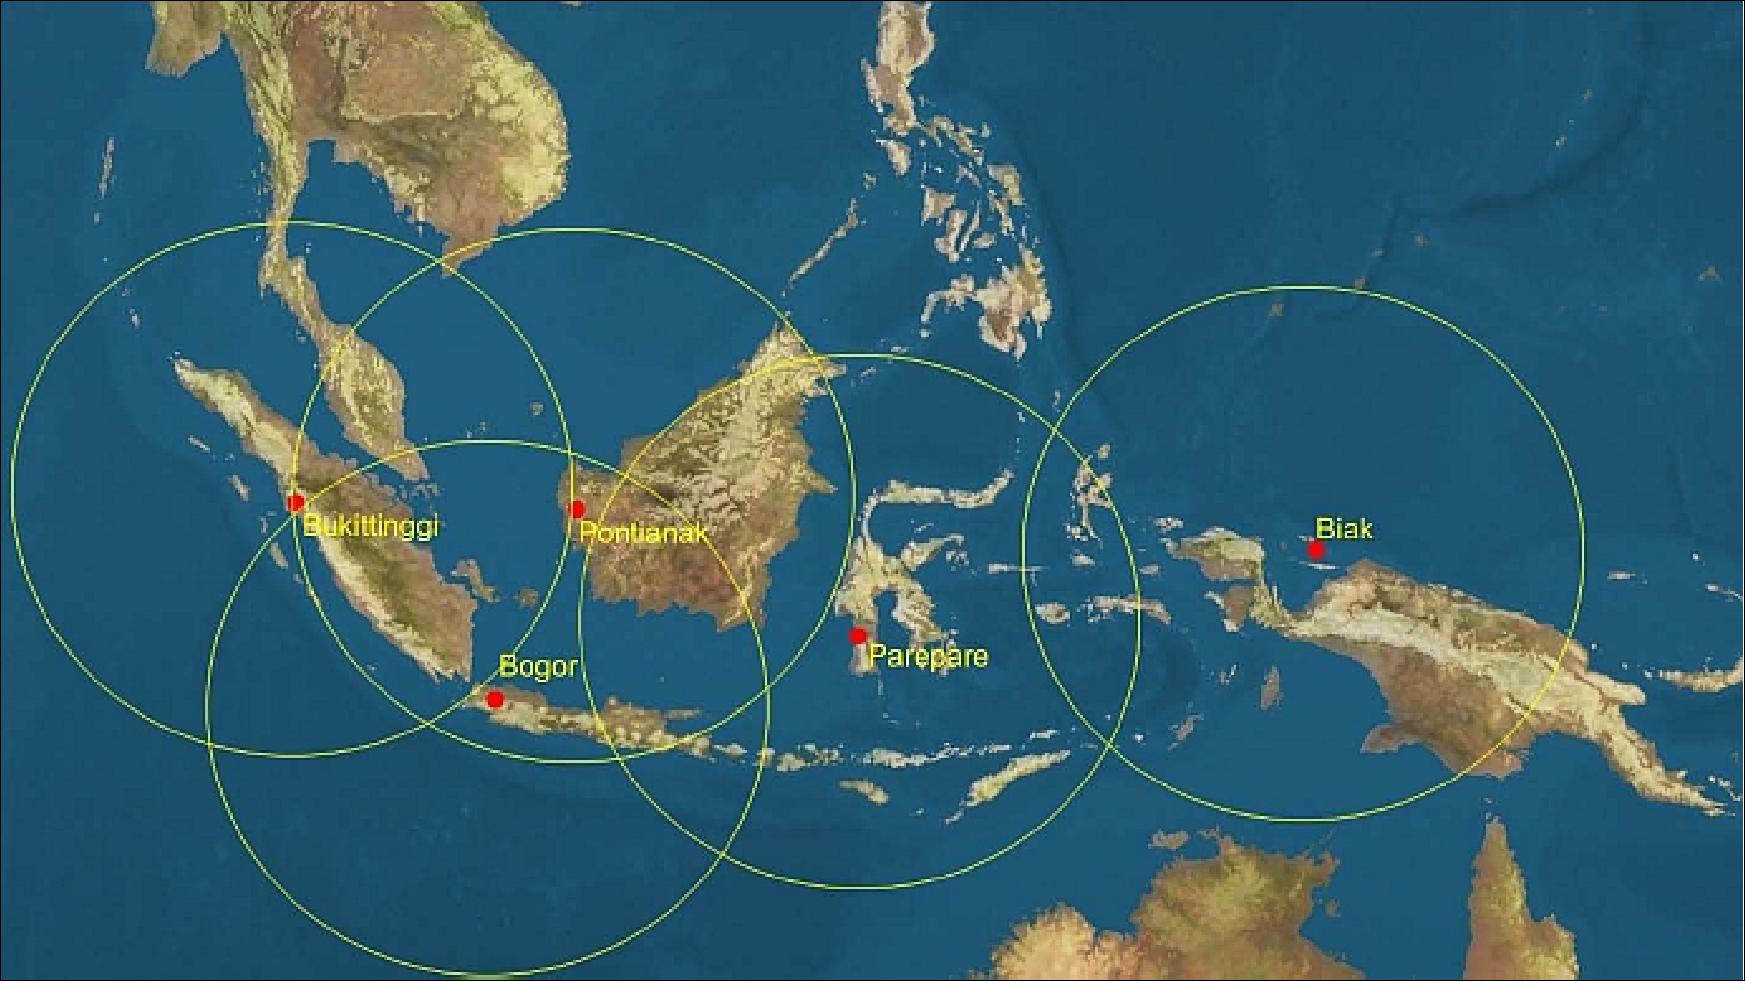 Figure 11: Ground station network of LAPAN-TUBSAT, LAPAN-A2 and LAPAN-A3 (image credit: LAPAN)